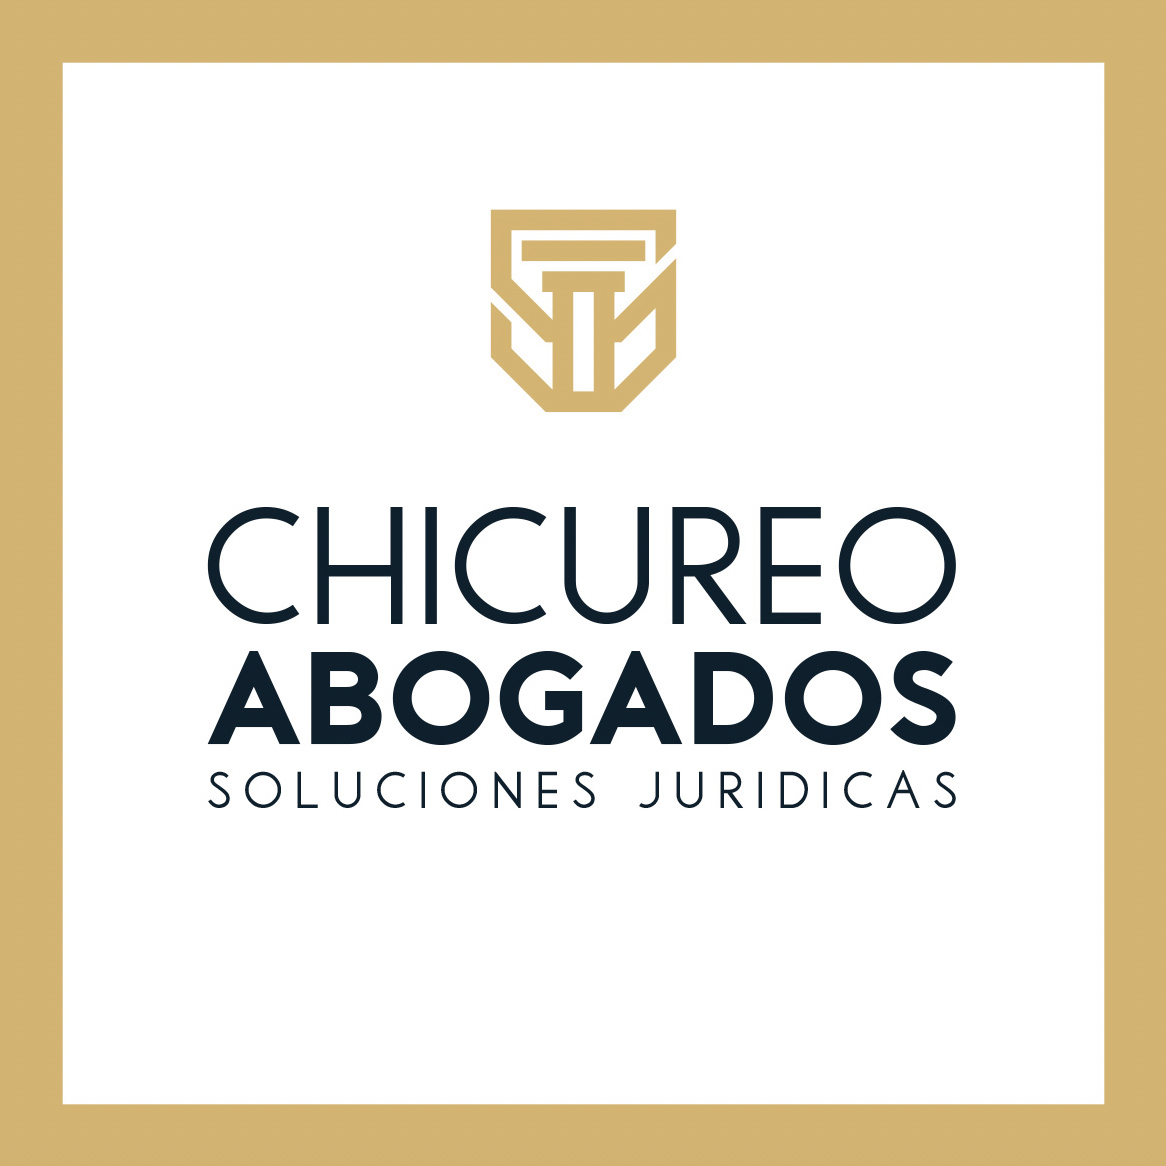 Guía Chicureo